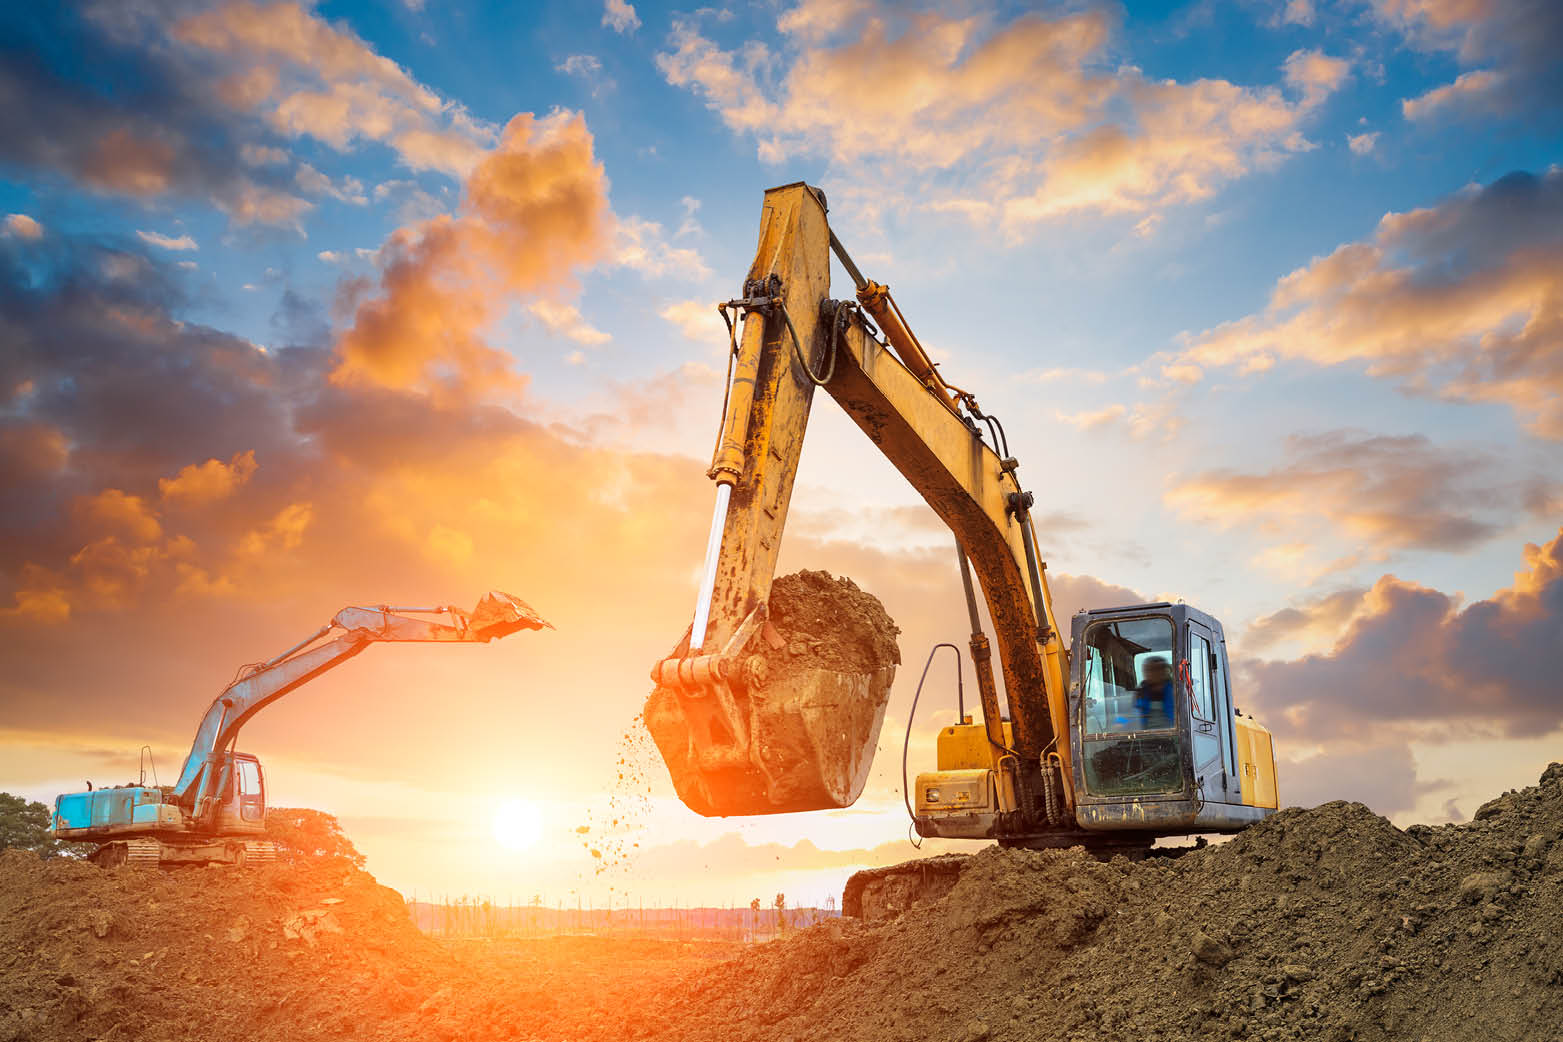 sunset pic of excavators using buckets digging trenches for property development